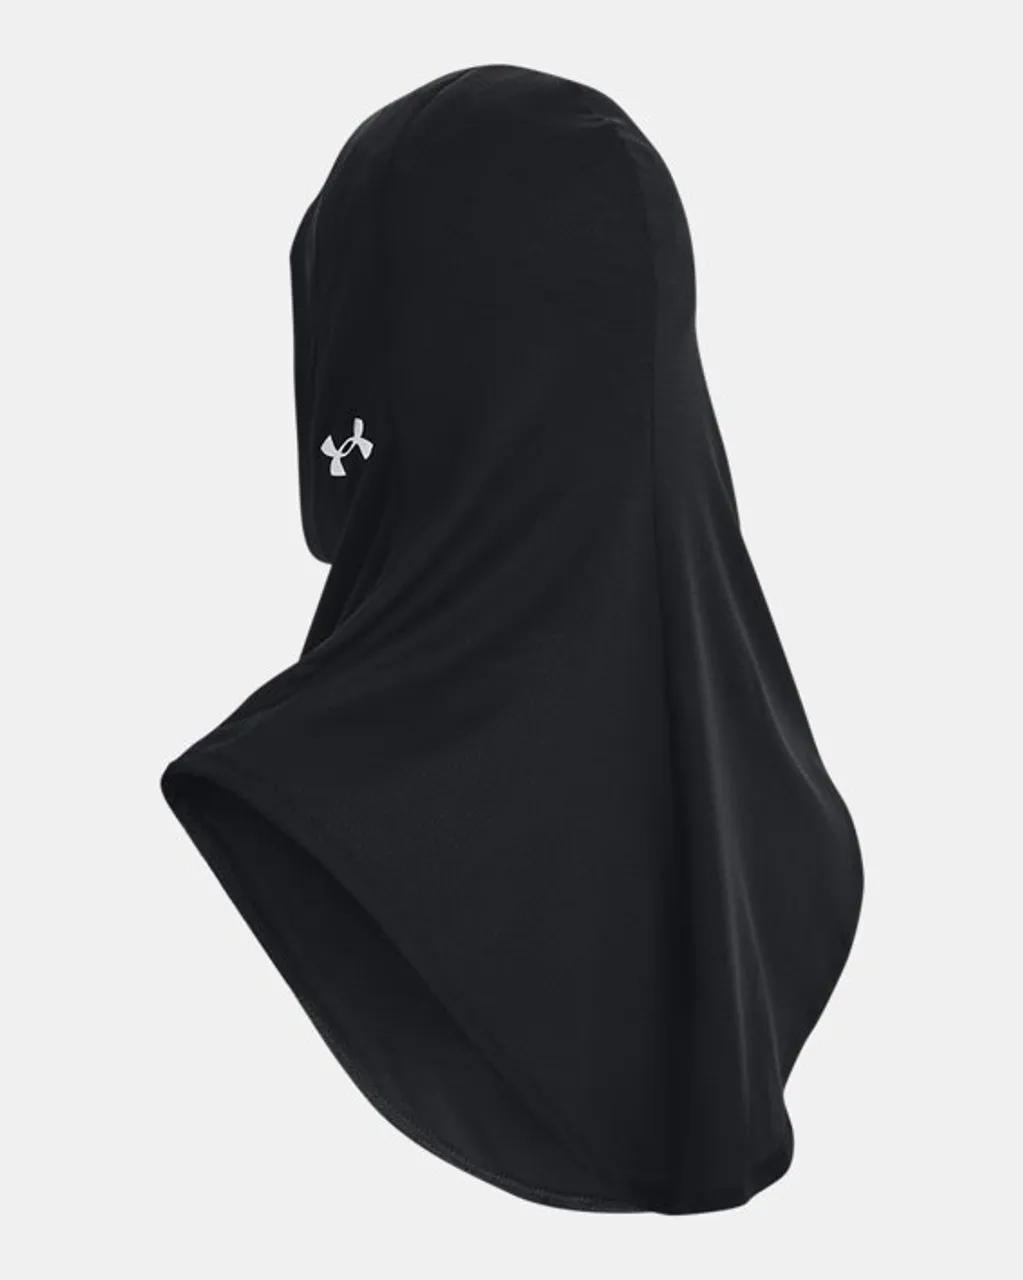 Women's  Under Armour  Extended Sport Hijab Black / Black / Silver